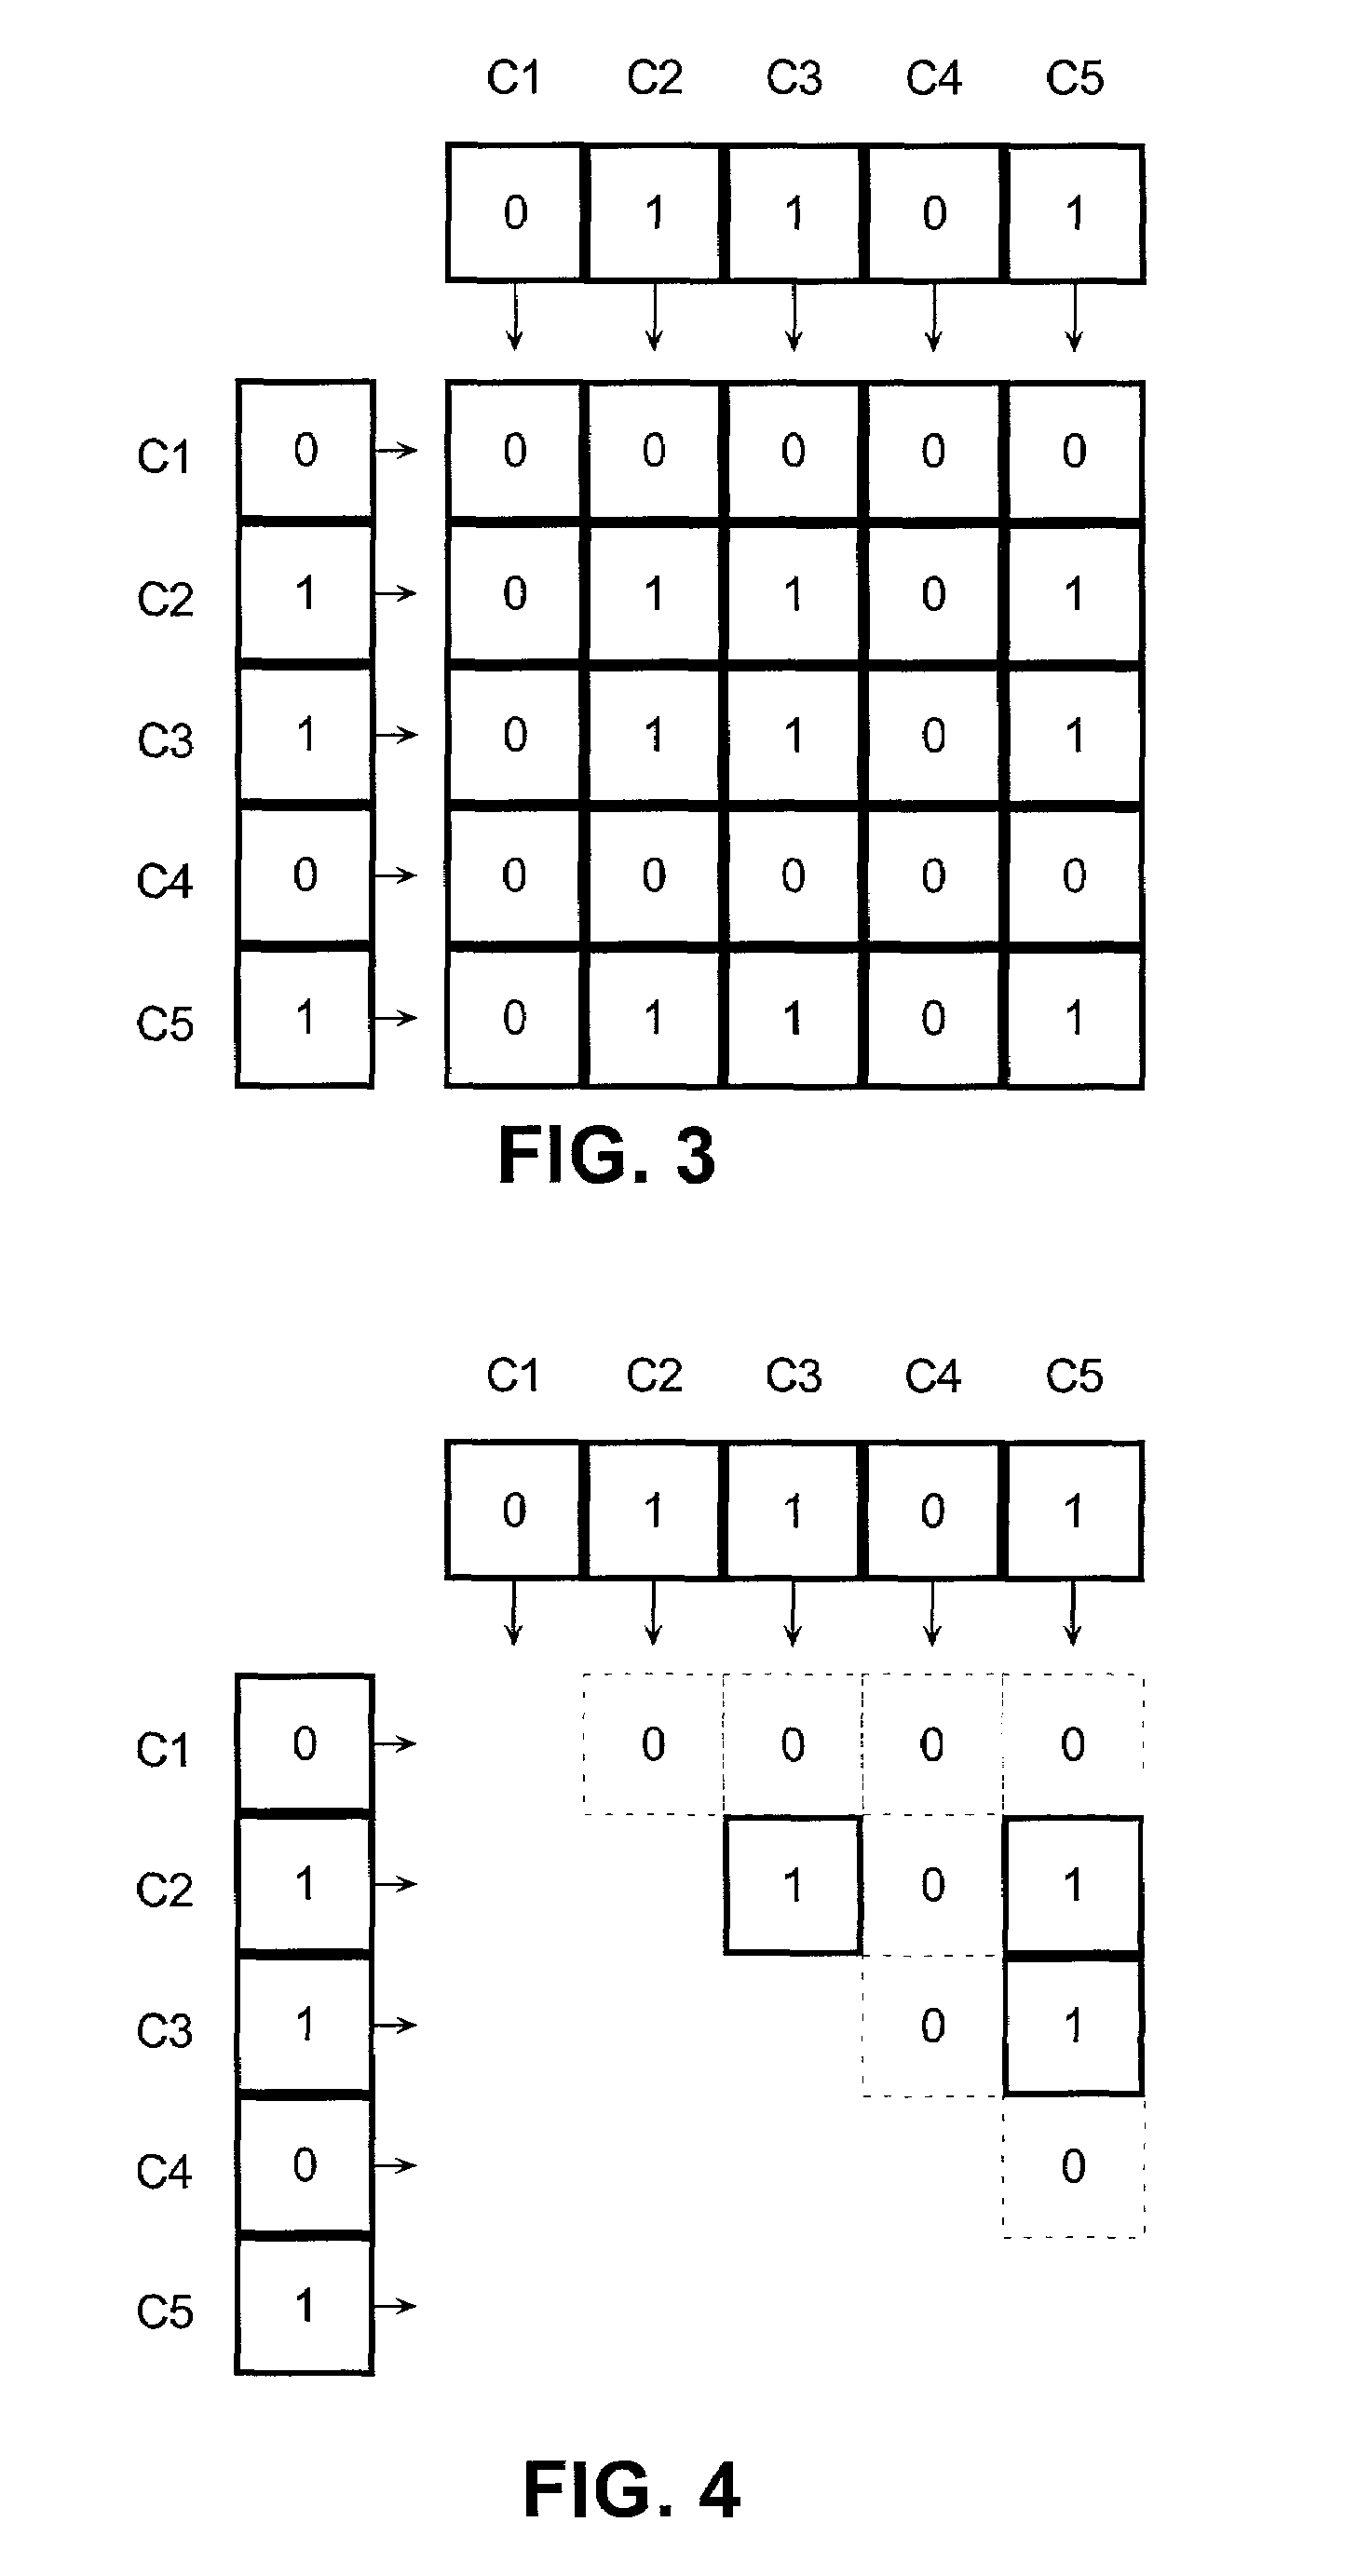 Method for extracting association rules from transactions in a database